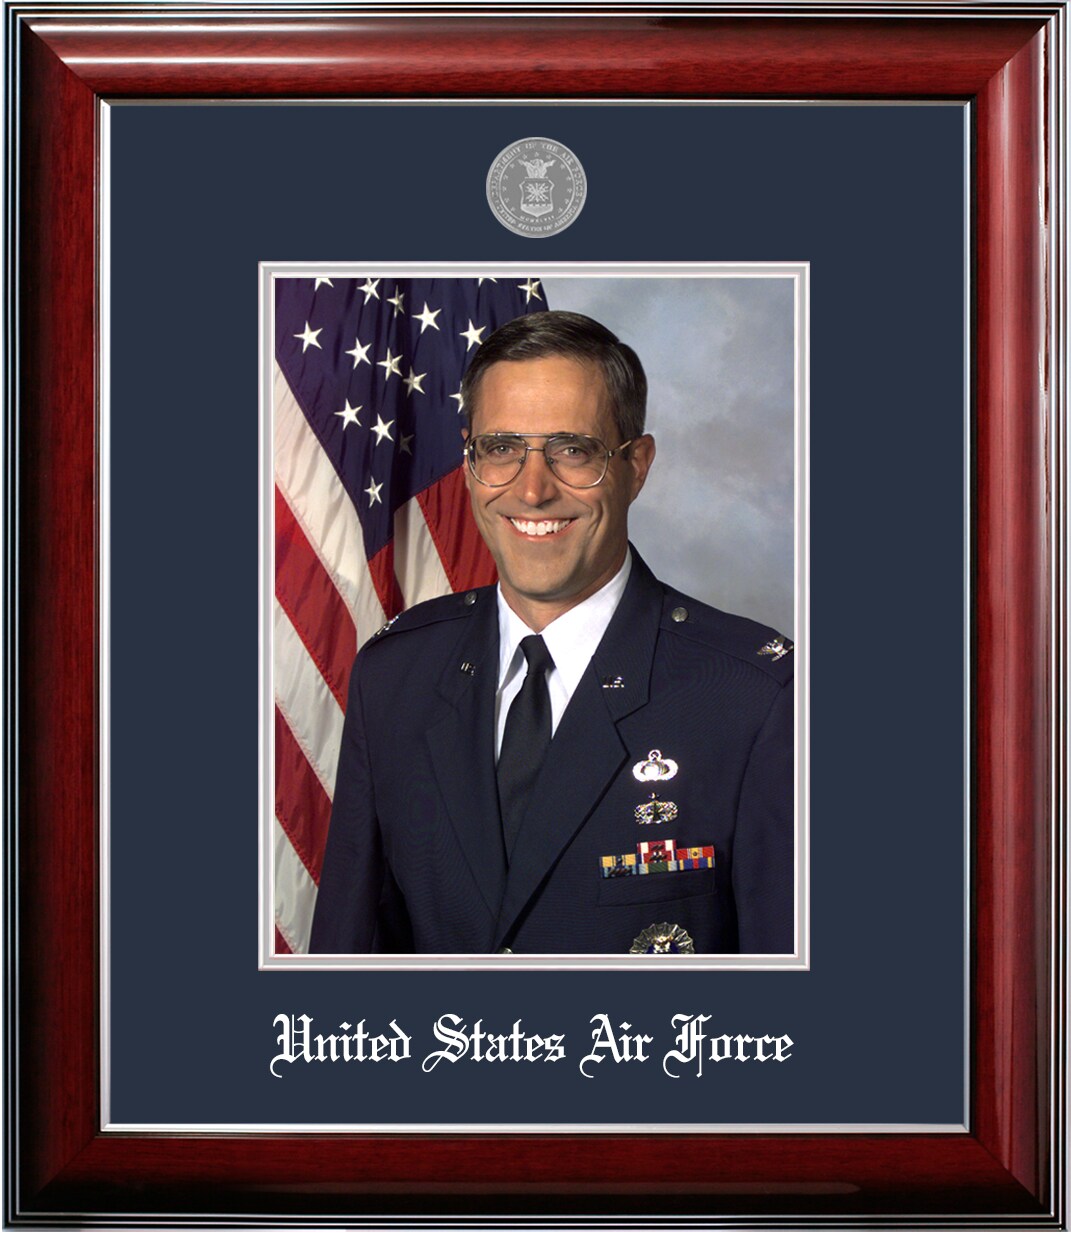 Patriot Frames Air Force 8x10 Portrait Classic Silver Frame with Silver Medallion